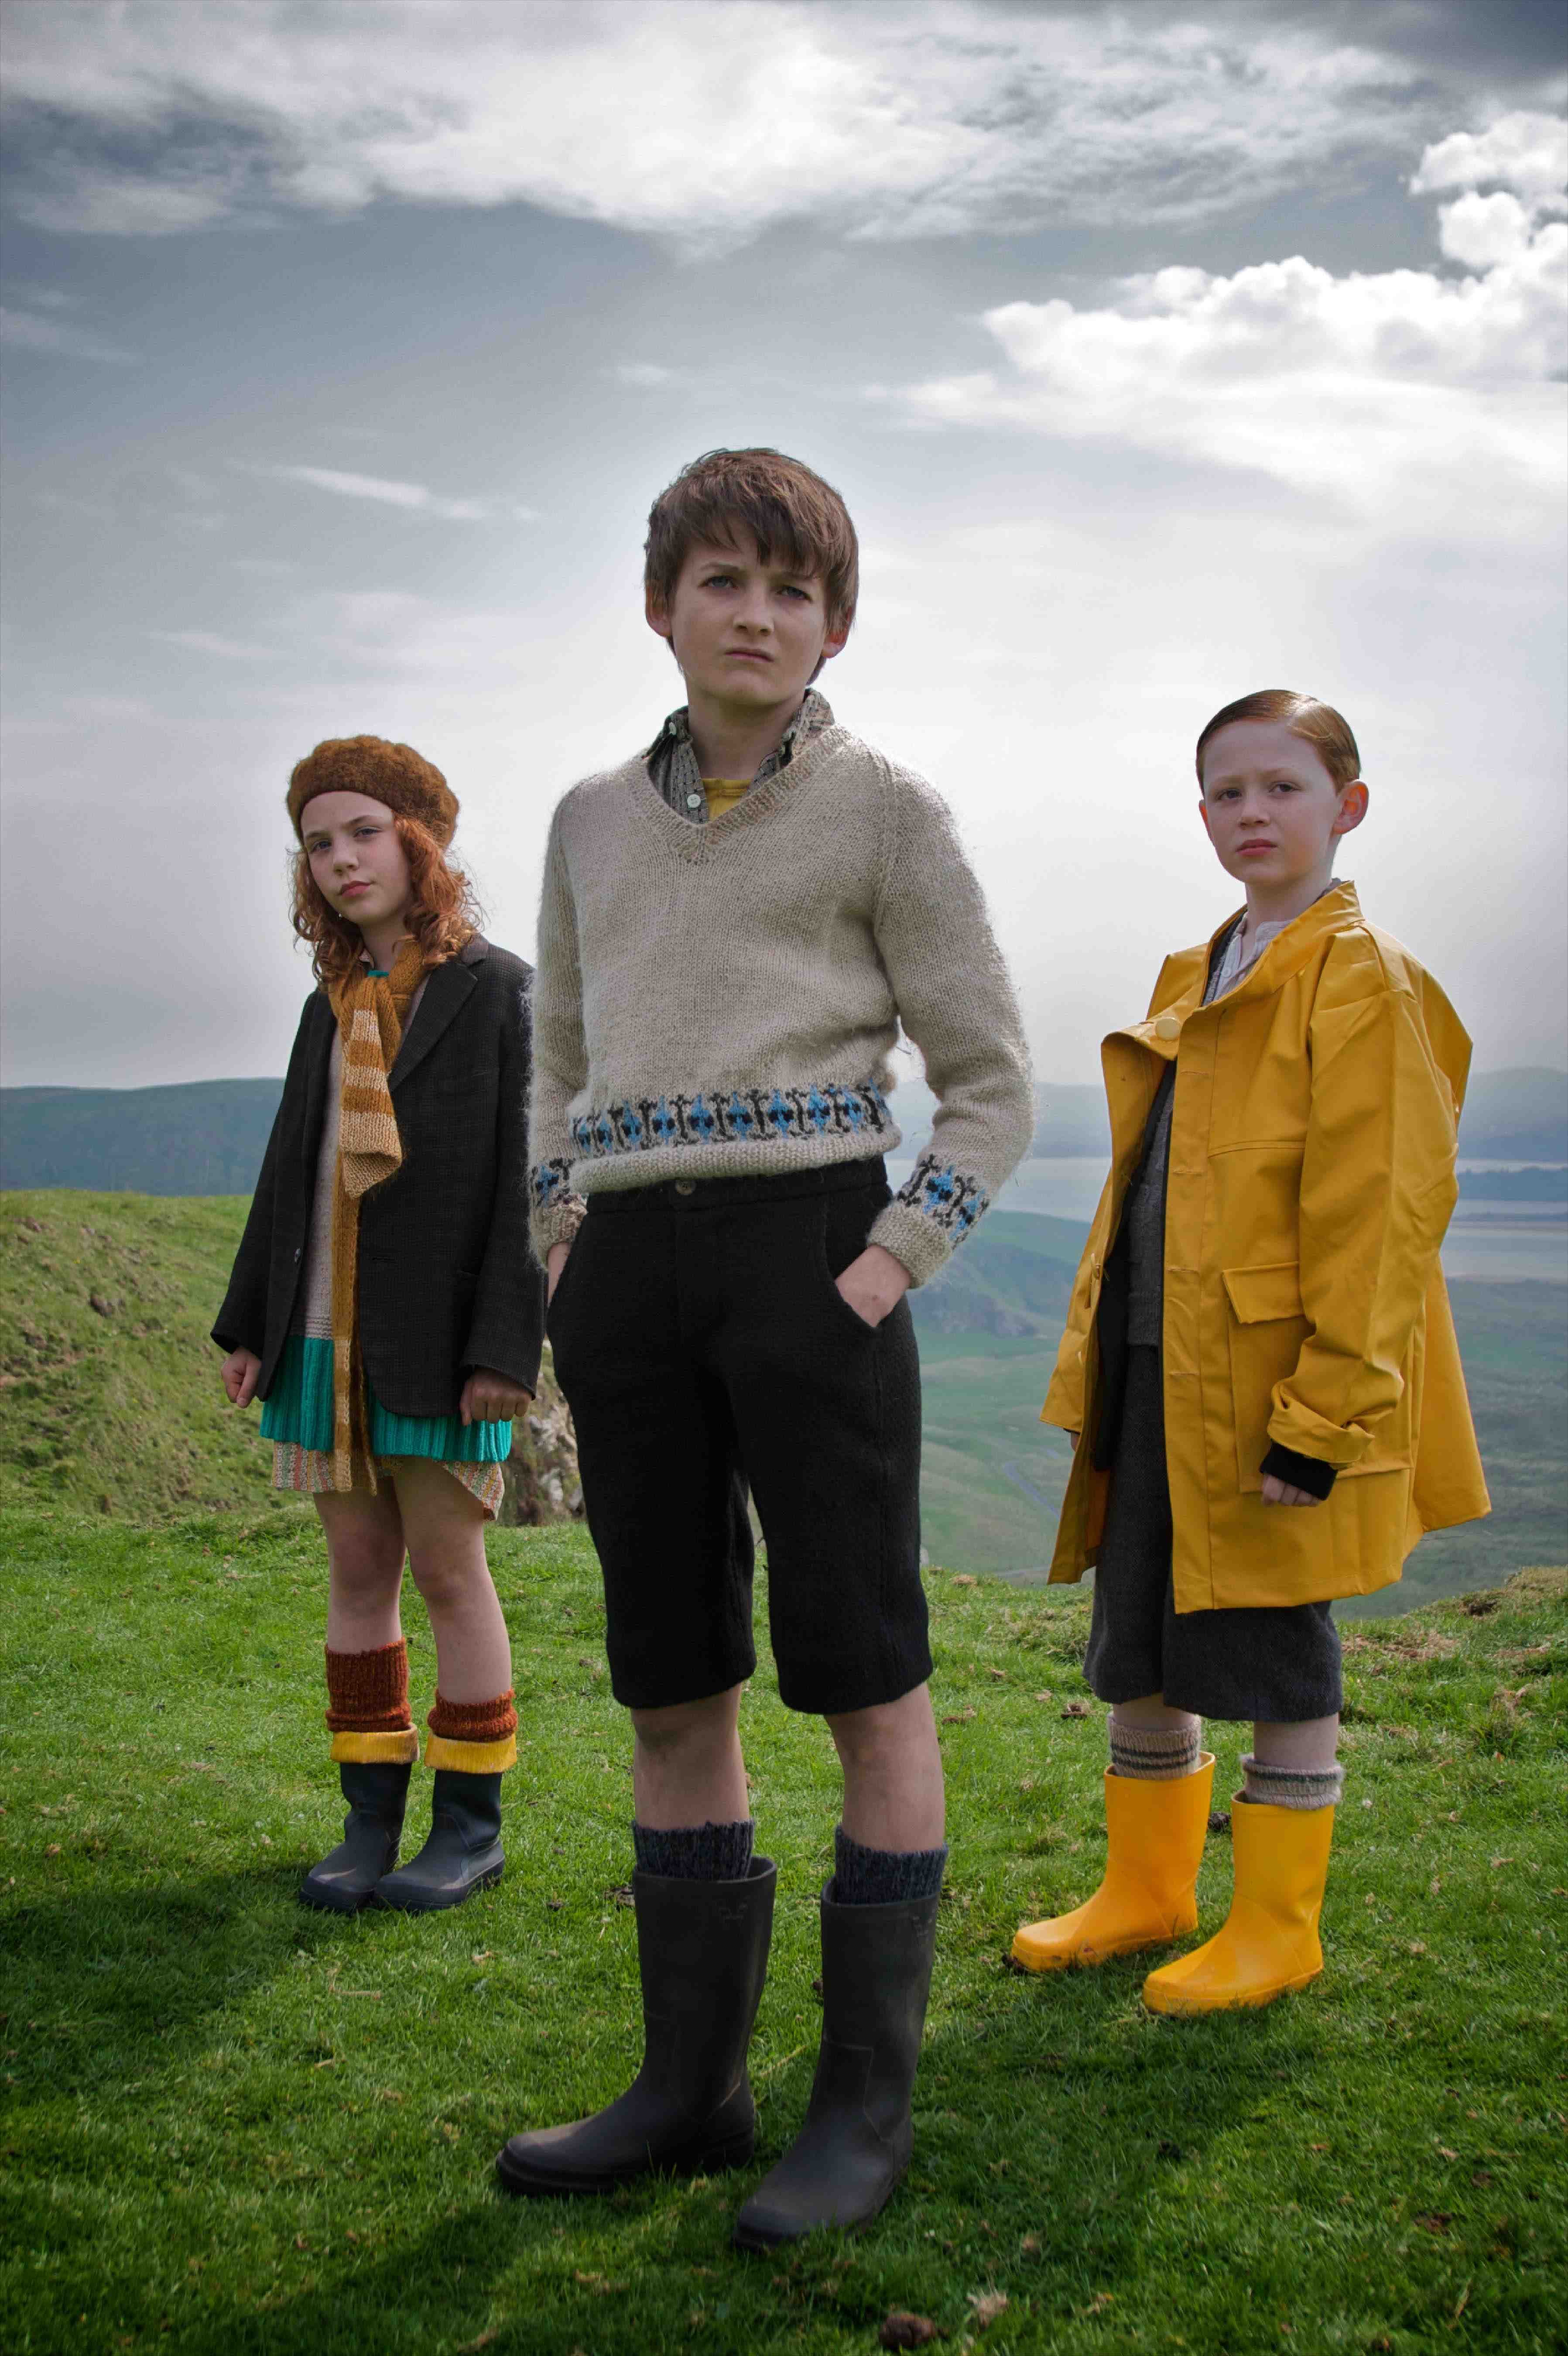 Jack Gleeson, John Bell and Tara Alice Scully in A Shine of Rainbows (2009)